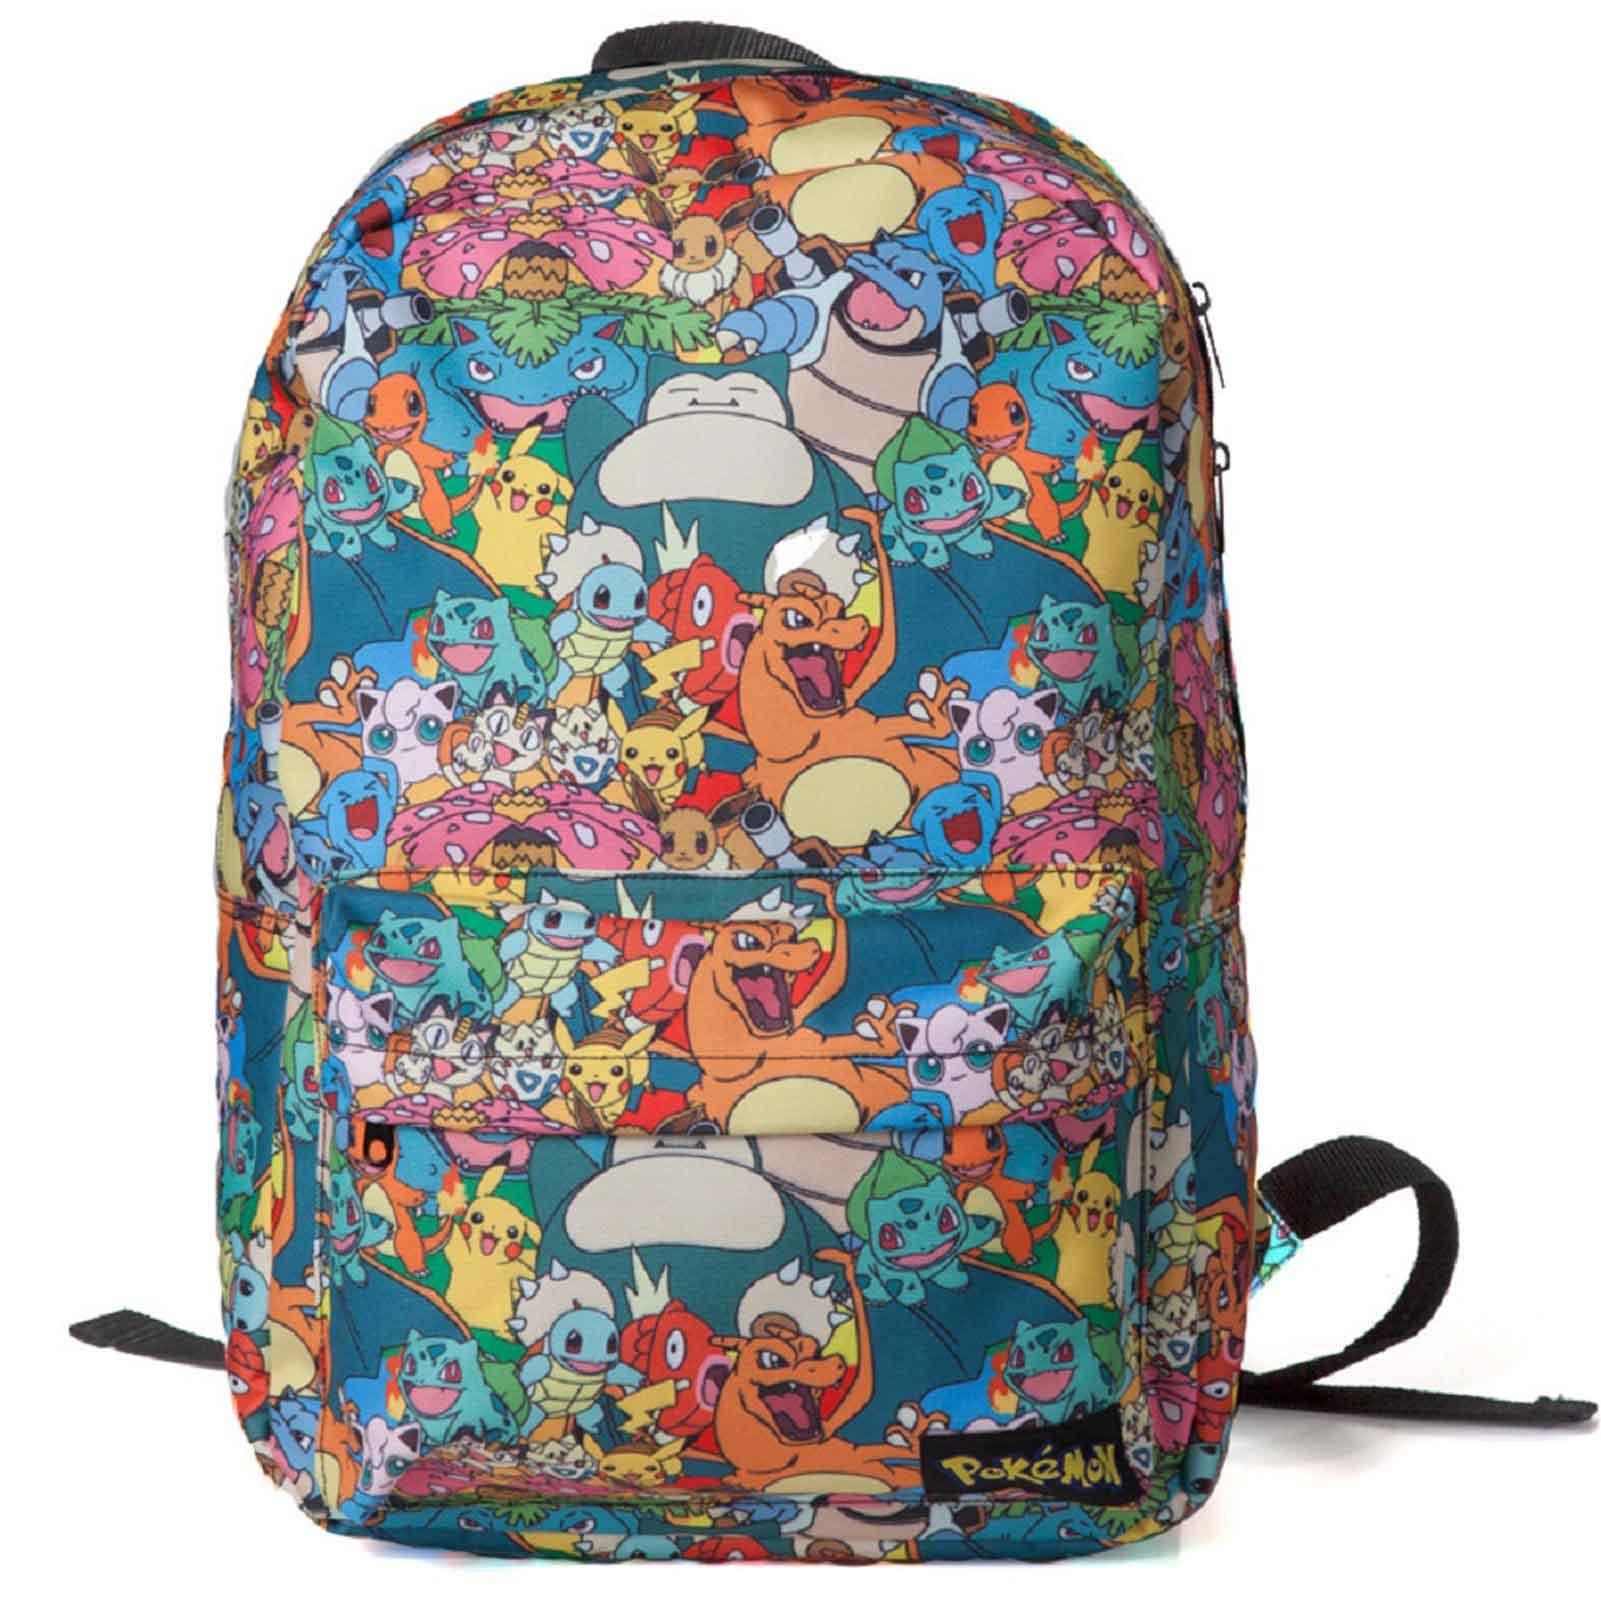 Pokemon Backpack bag All Over Print Characters Pikachu new Official